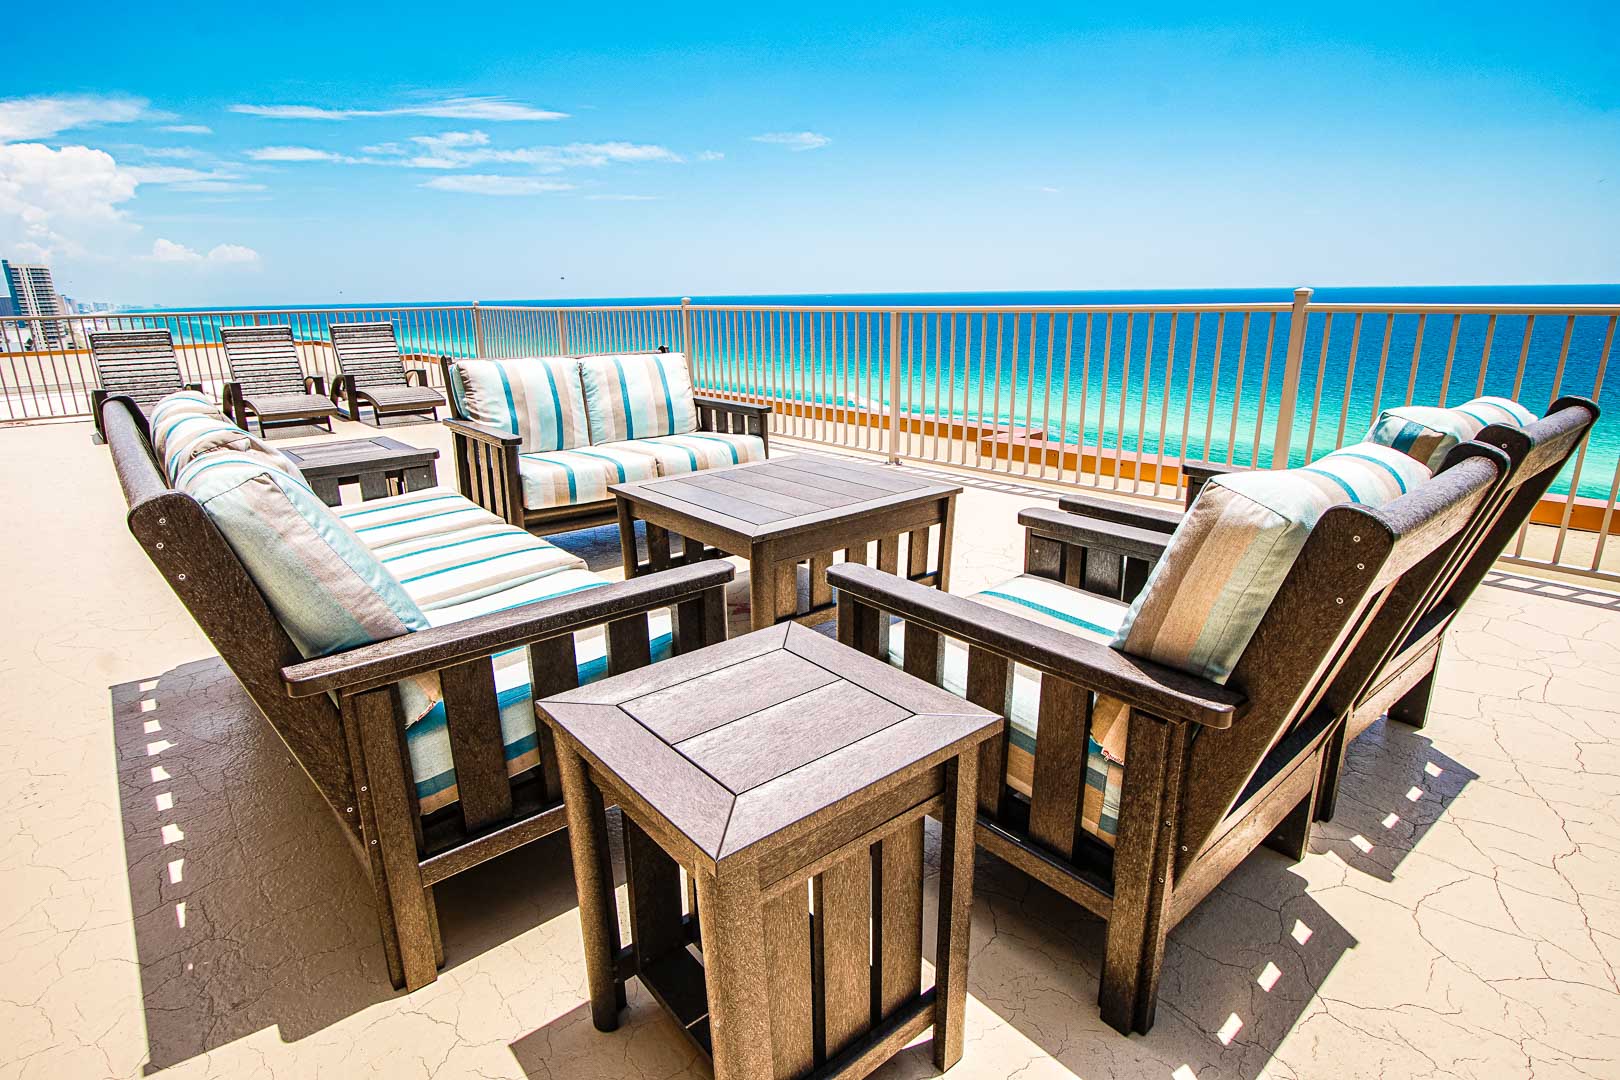 A relaxing view of the beach at VRI's Landmark Holiday Beach Resort in Panama City, Florida.